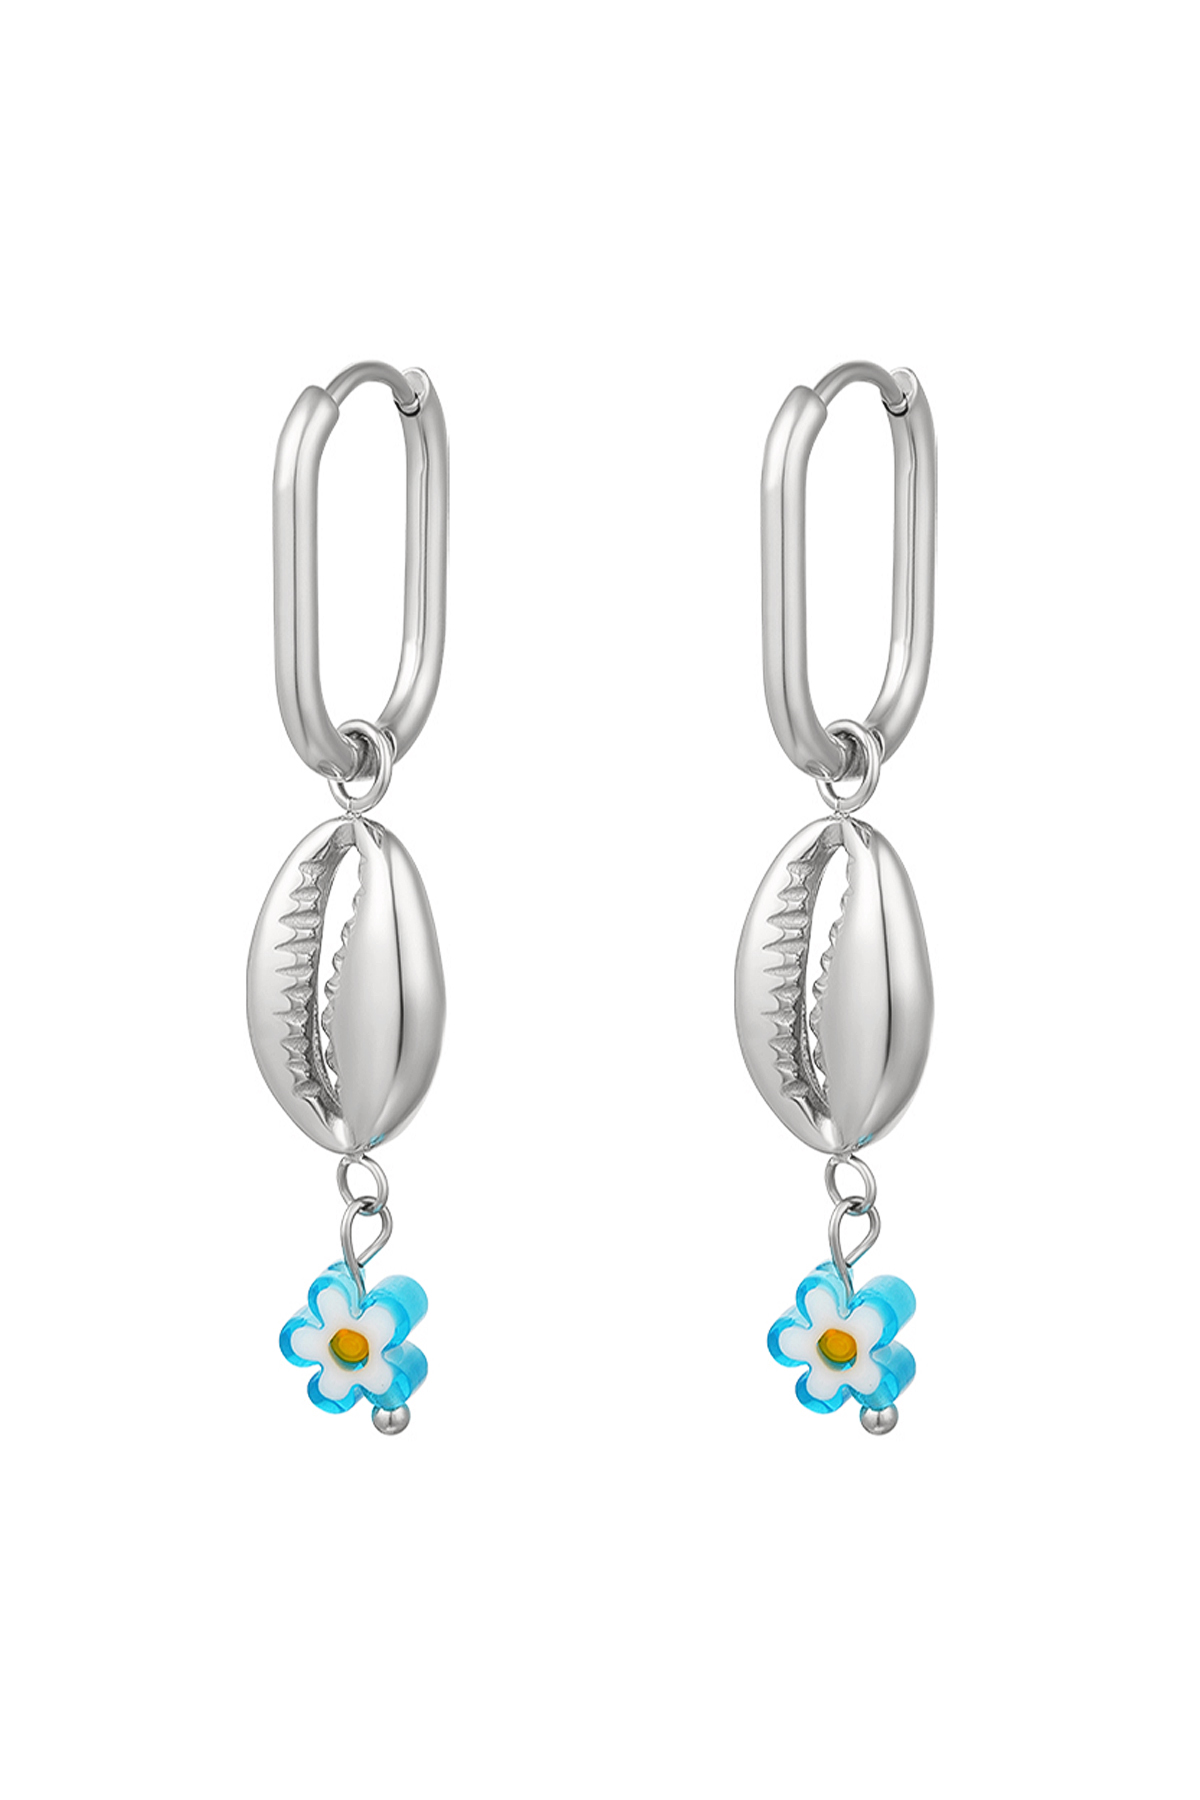 Blue daisy earrings - Beach collection Silver Stainless Steel